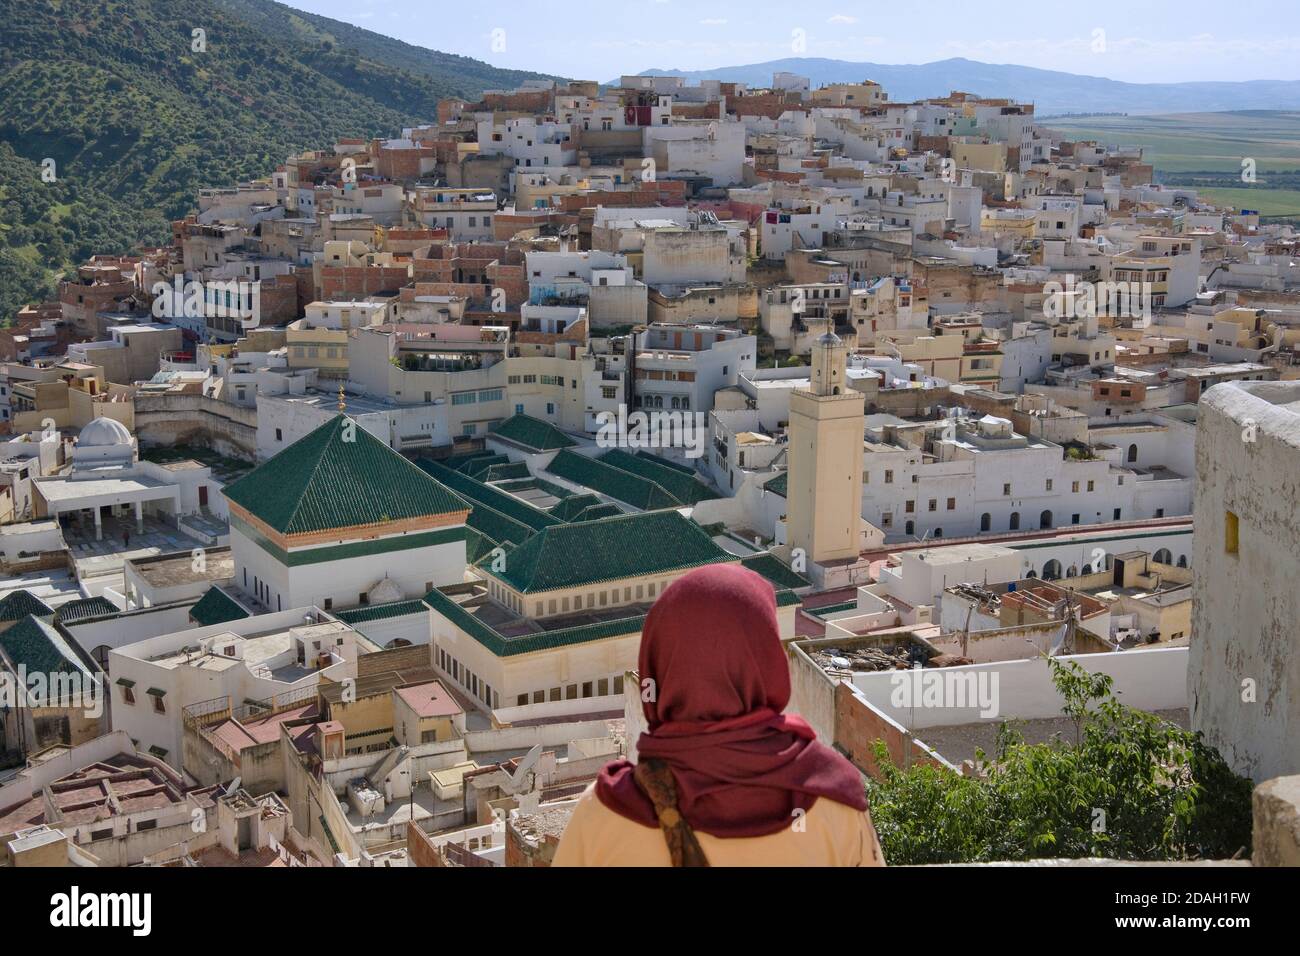 Woman looking at Moulay Idriss dominated by Zaouia (religious school), Morocco Stock Photo